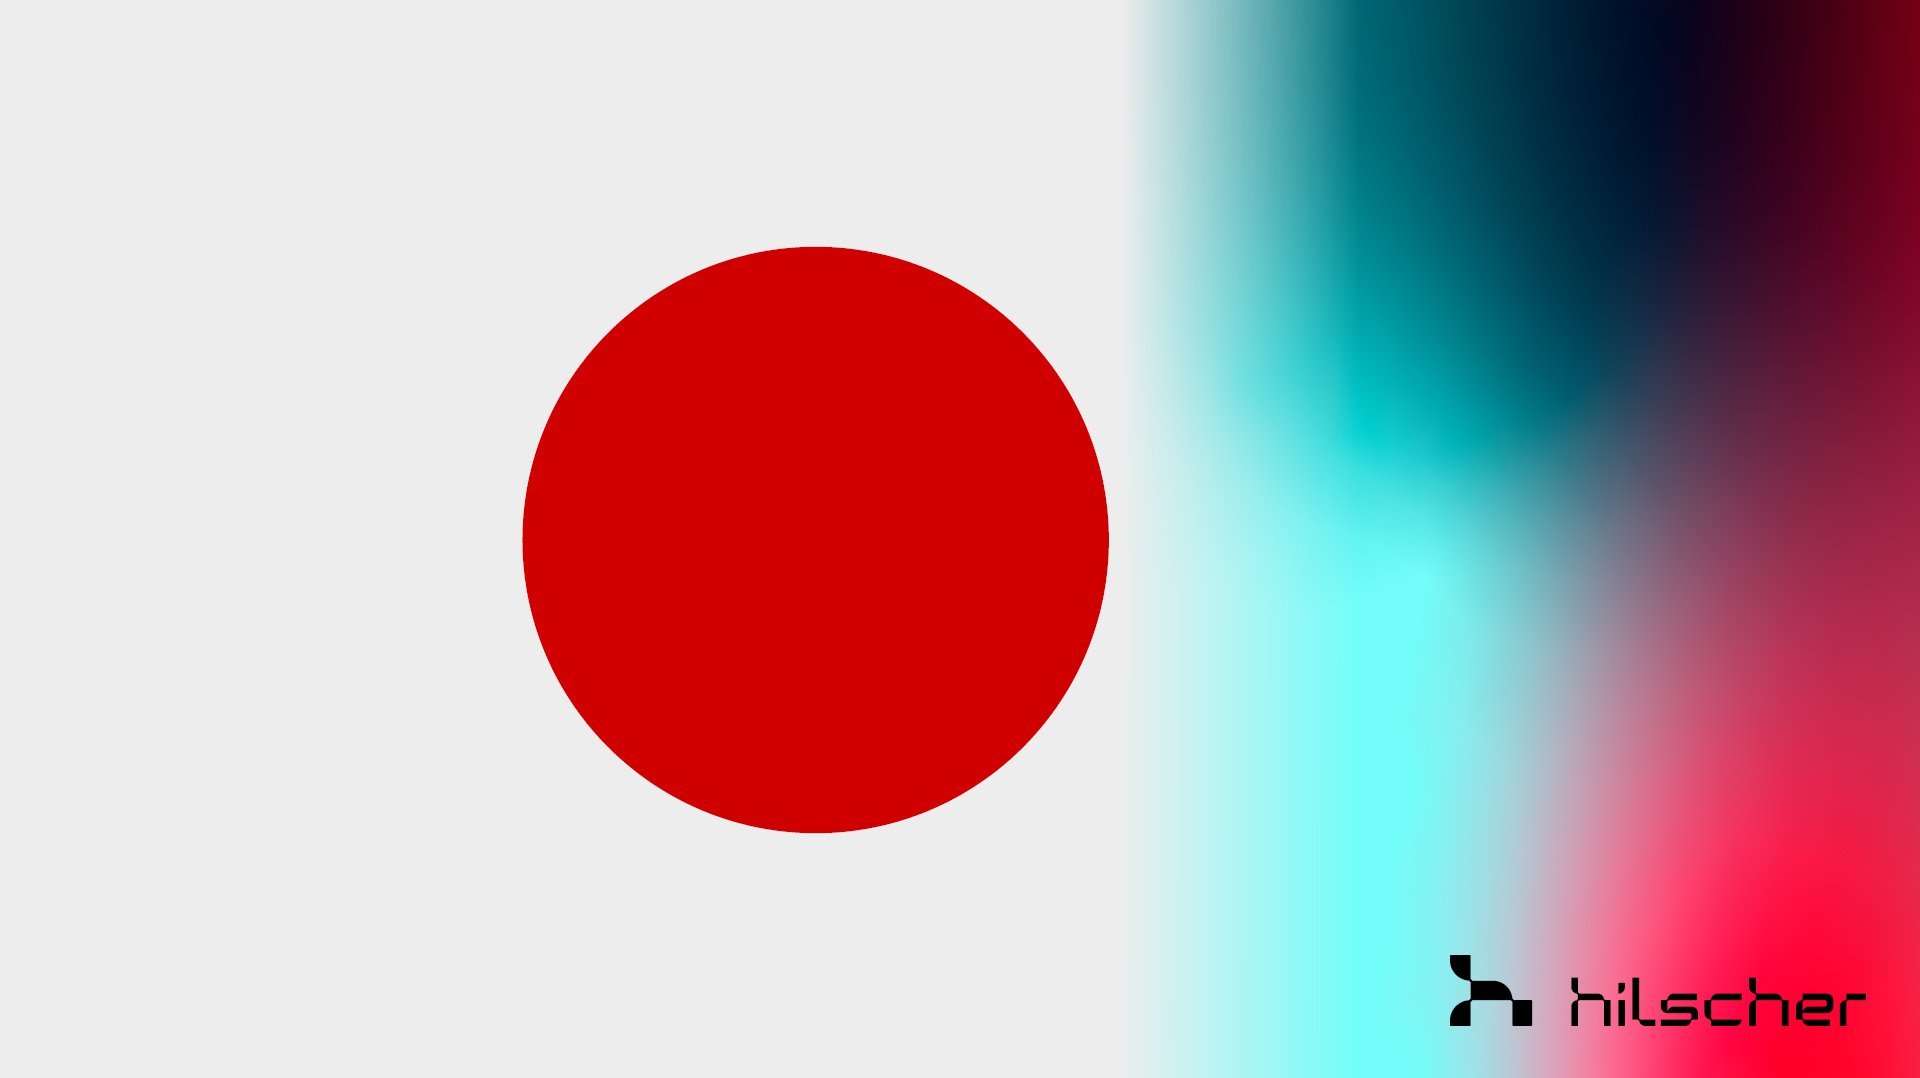 The flag of Japan. On the right side of the picture is a fade to a colorful space, accounting for nearly a quarter of the image.